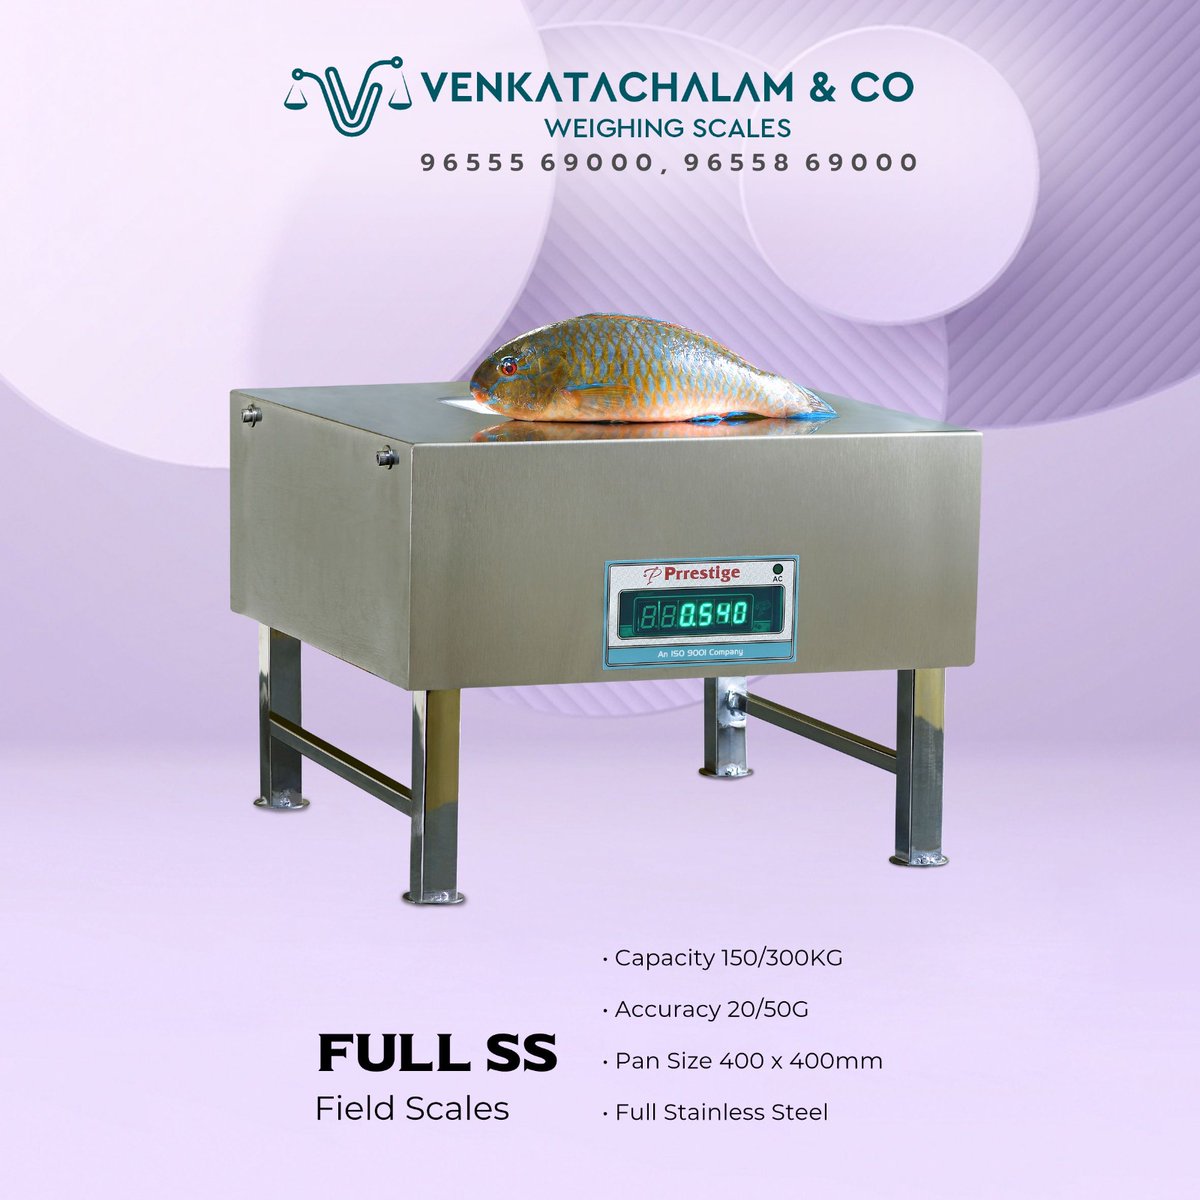 FULL SS 300KG weighing scale - made with stainless steel platform. 60Hrs* Battery backup with LED Green Display. Highly recommend for #fishshop #vegetablemarket #milkfactory #dairyindustry

#venkatachalam #prrestigescale  #FieldScales #weighingmachine #weighingscale #Digitalscale